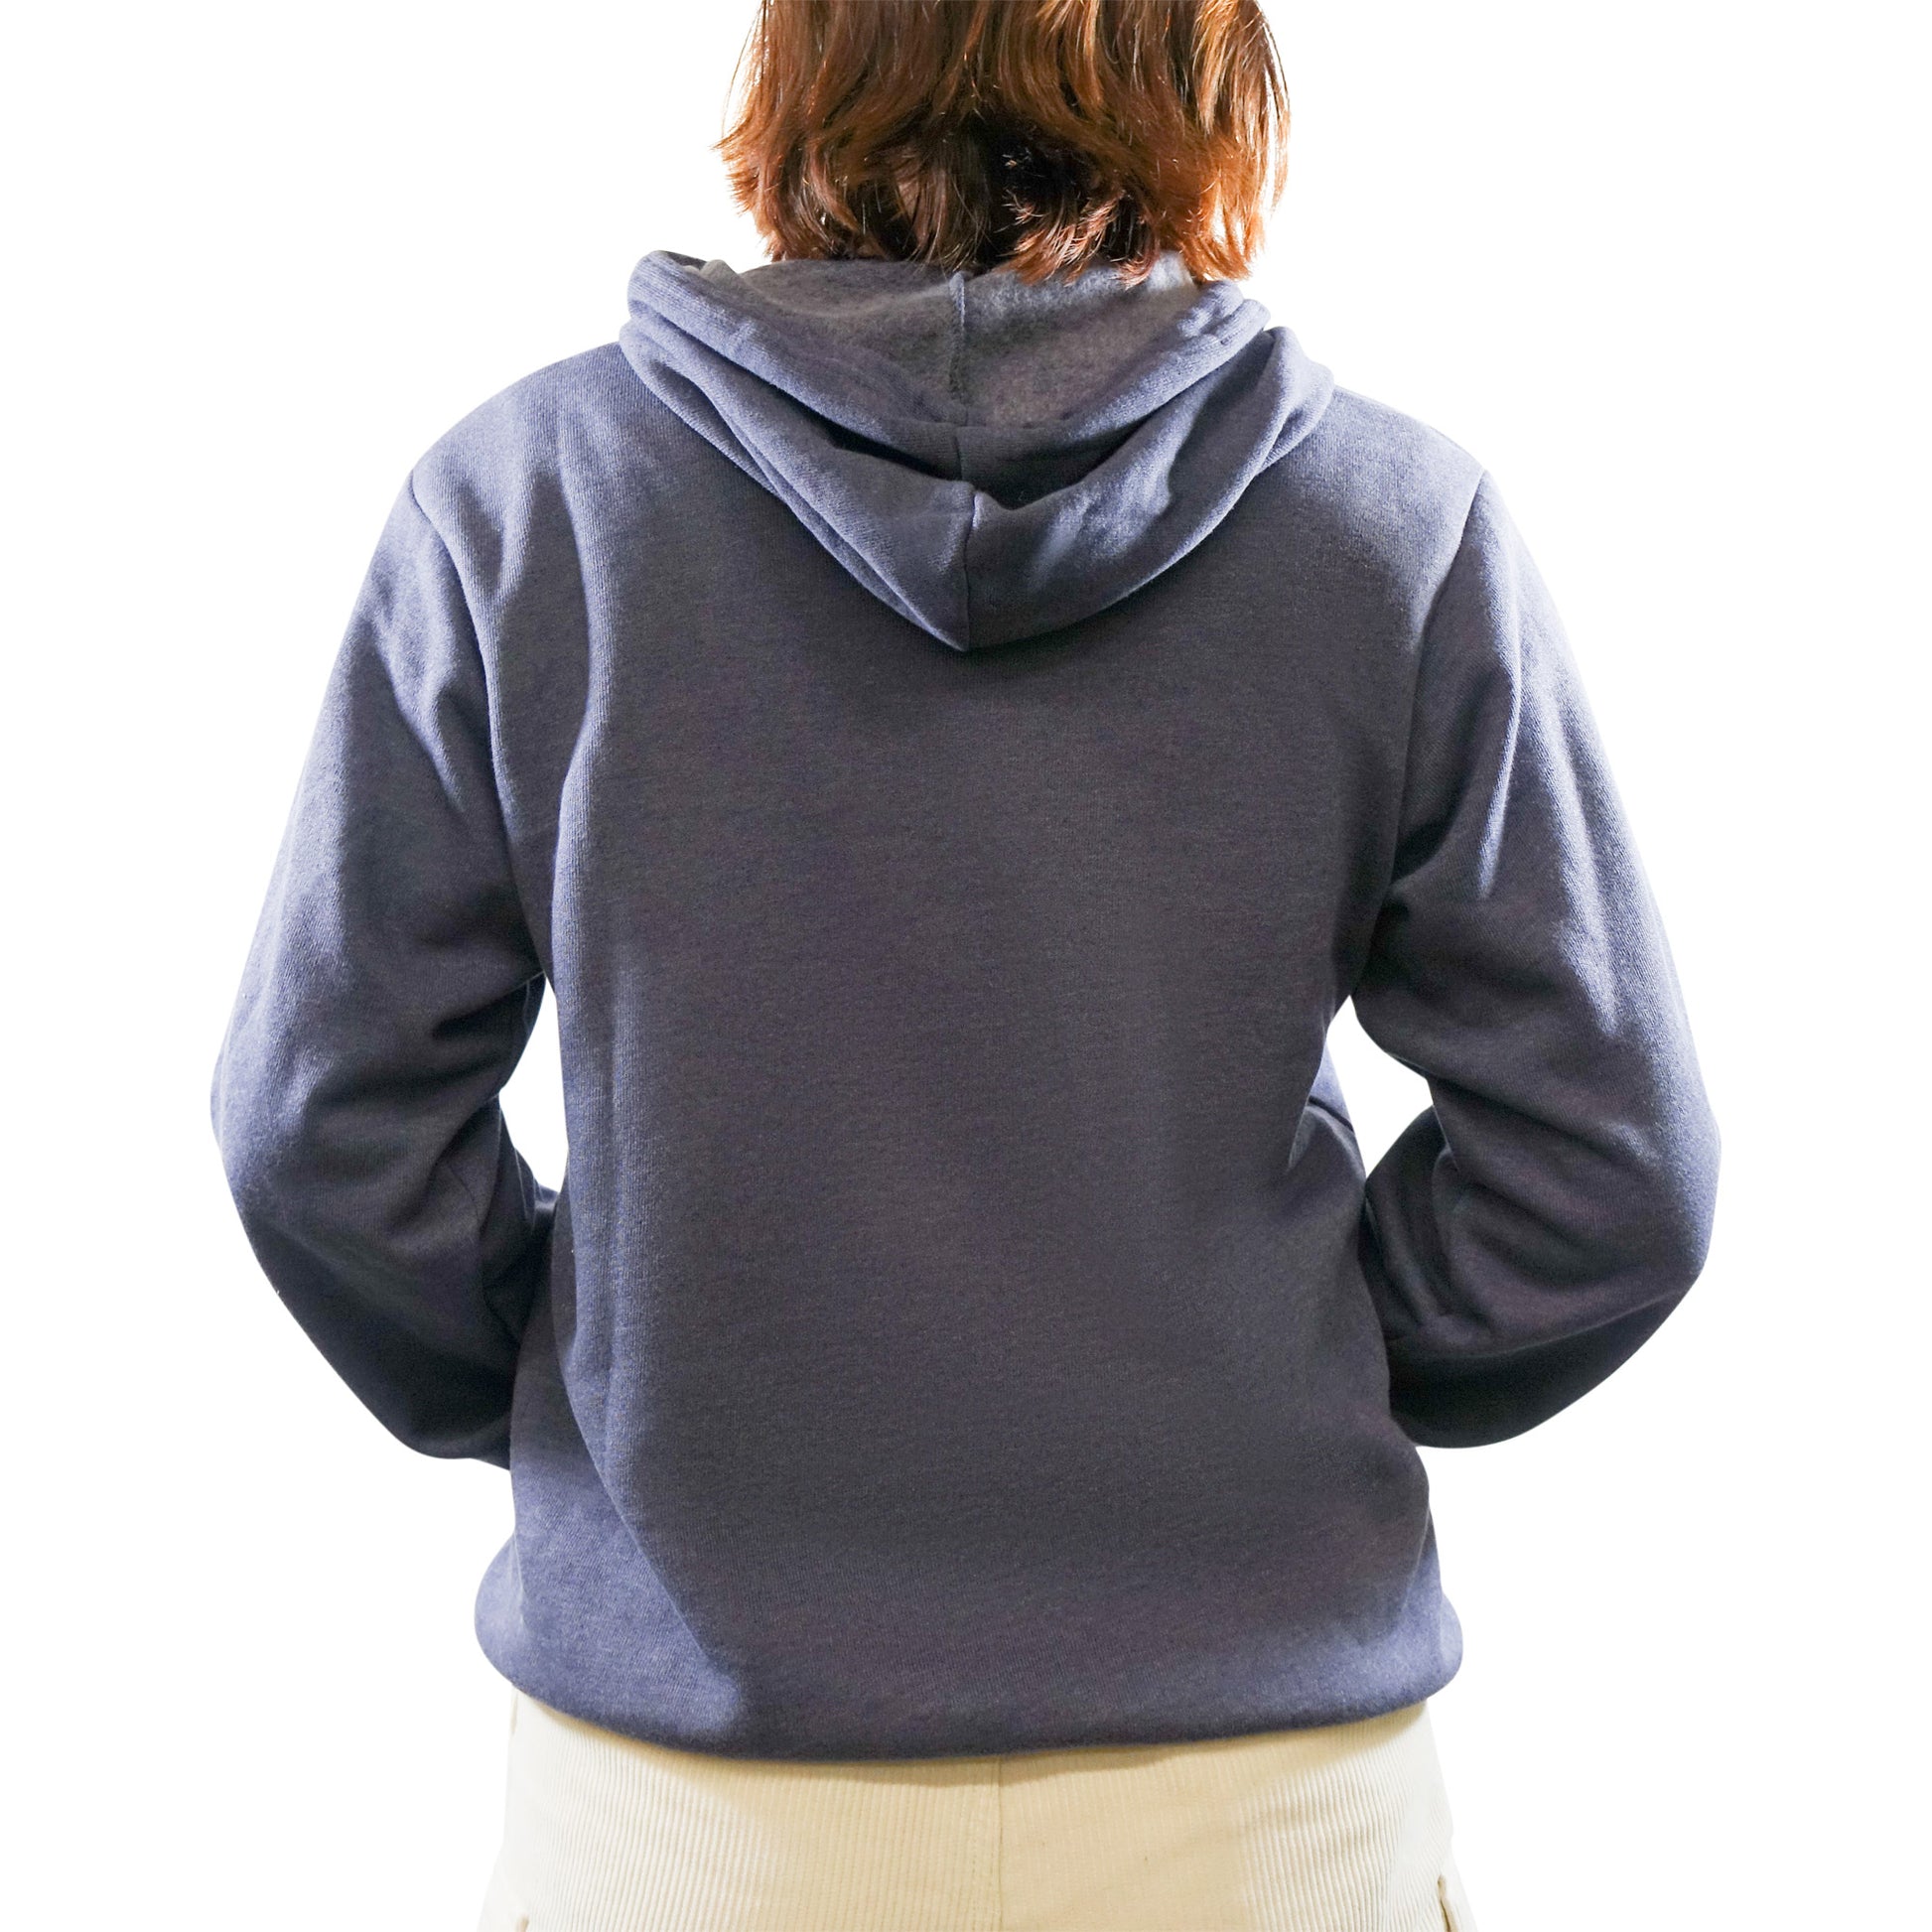 A person in a Mainers pullover hoodie.